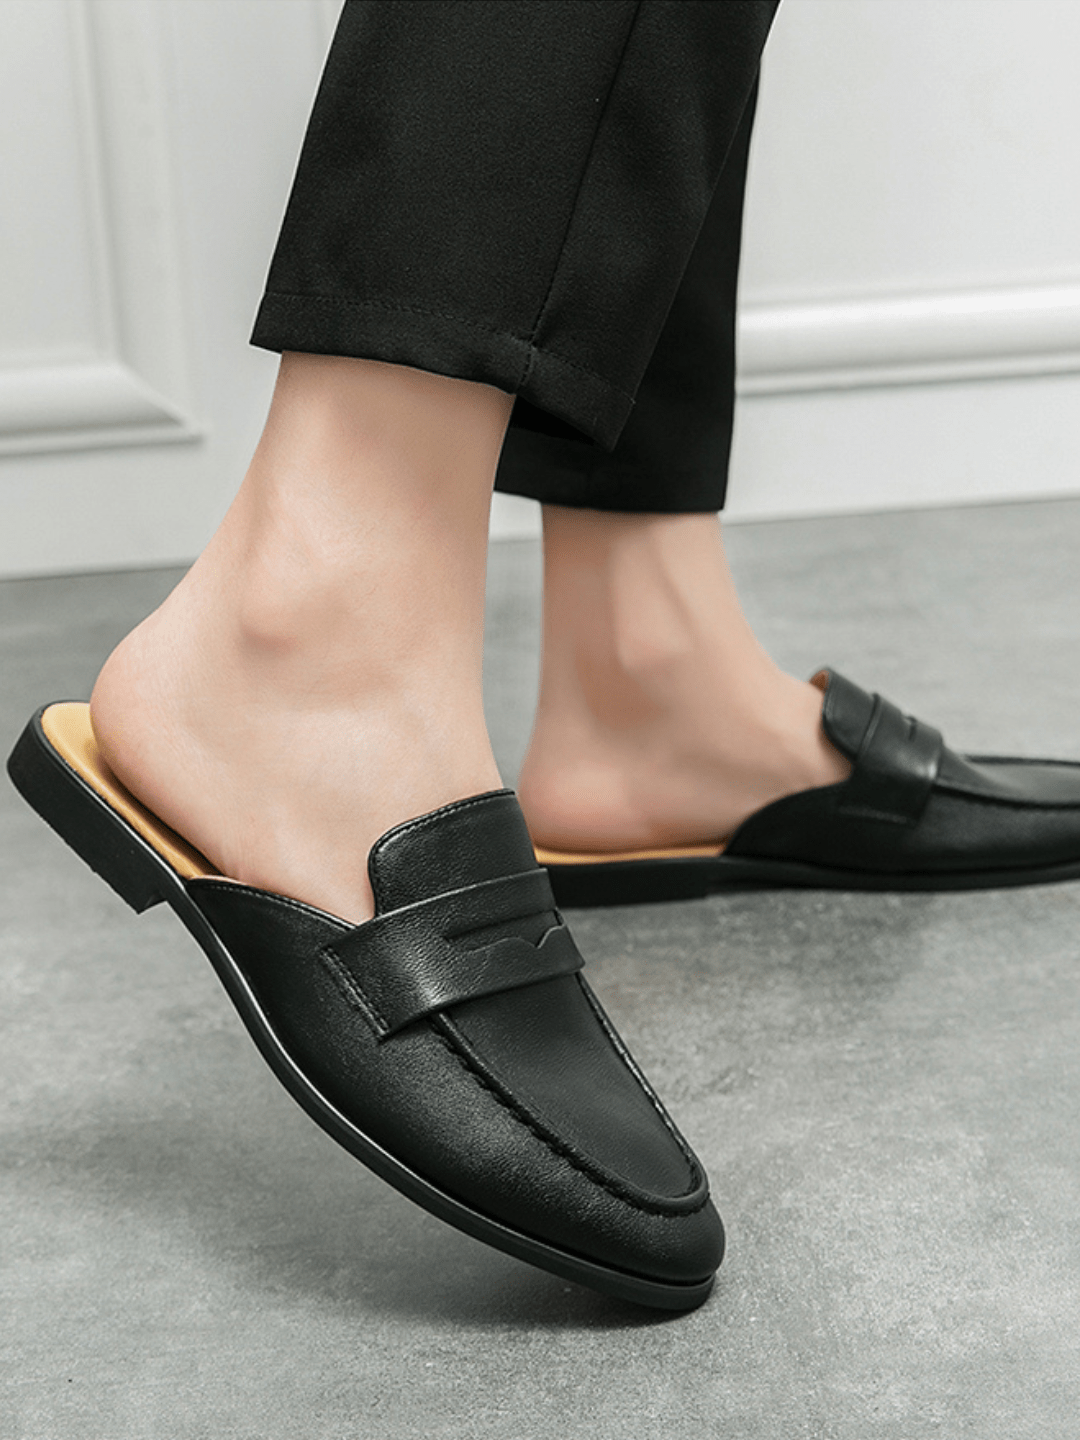 Backless Pointed-toe Leather Shoes na1135 